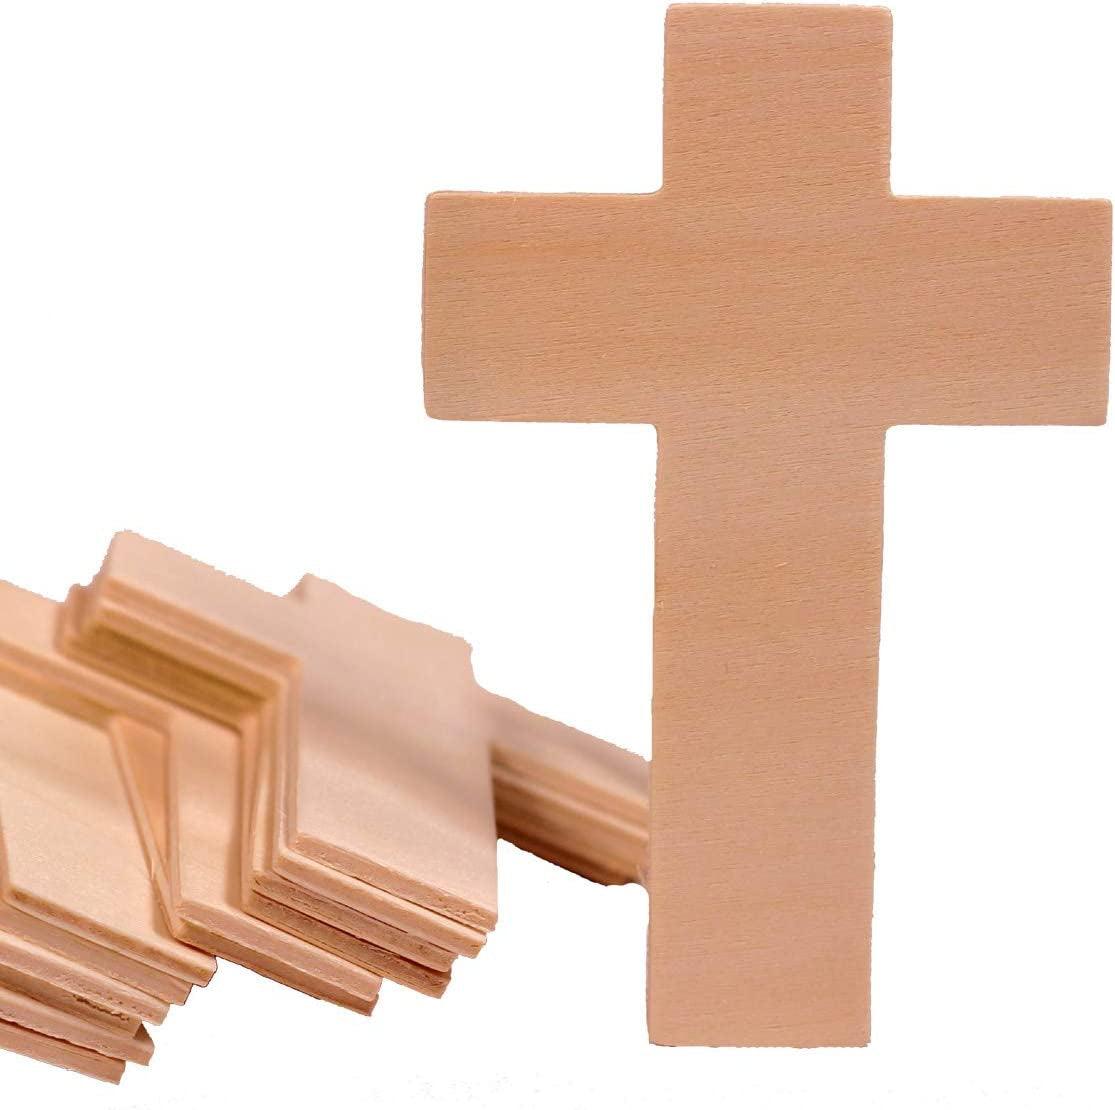 4.25 Inch High Unfinished Wooden Cross Shapes, Pack of 25, Ready to Paint or Decorate - WoodArtSupply